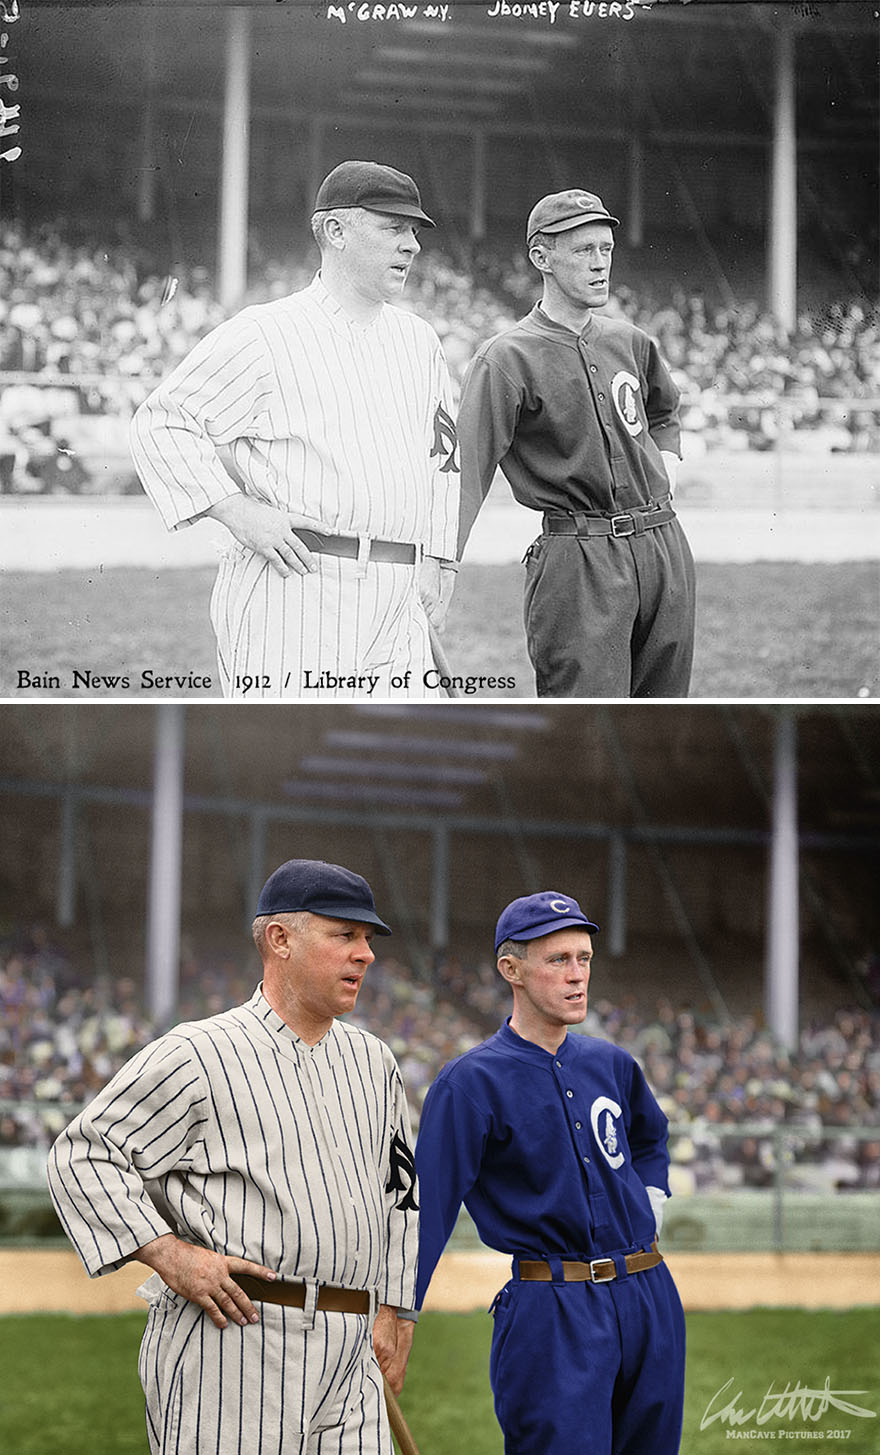 New York Giants Manager John Mcgraw With Chicago Cubs Star Johnny Evers, 1912